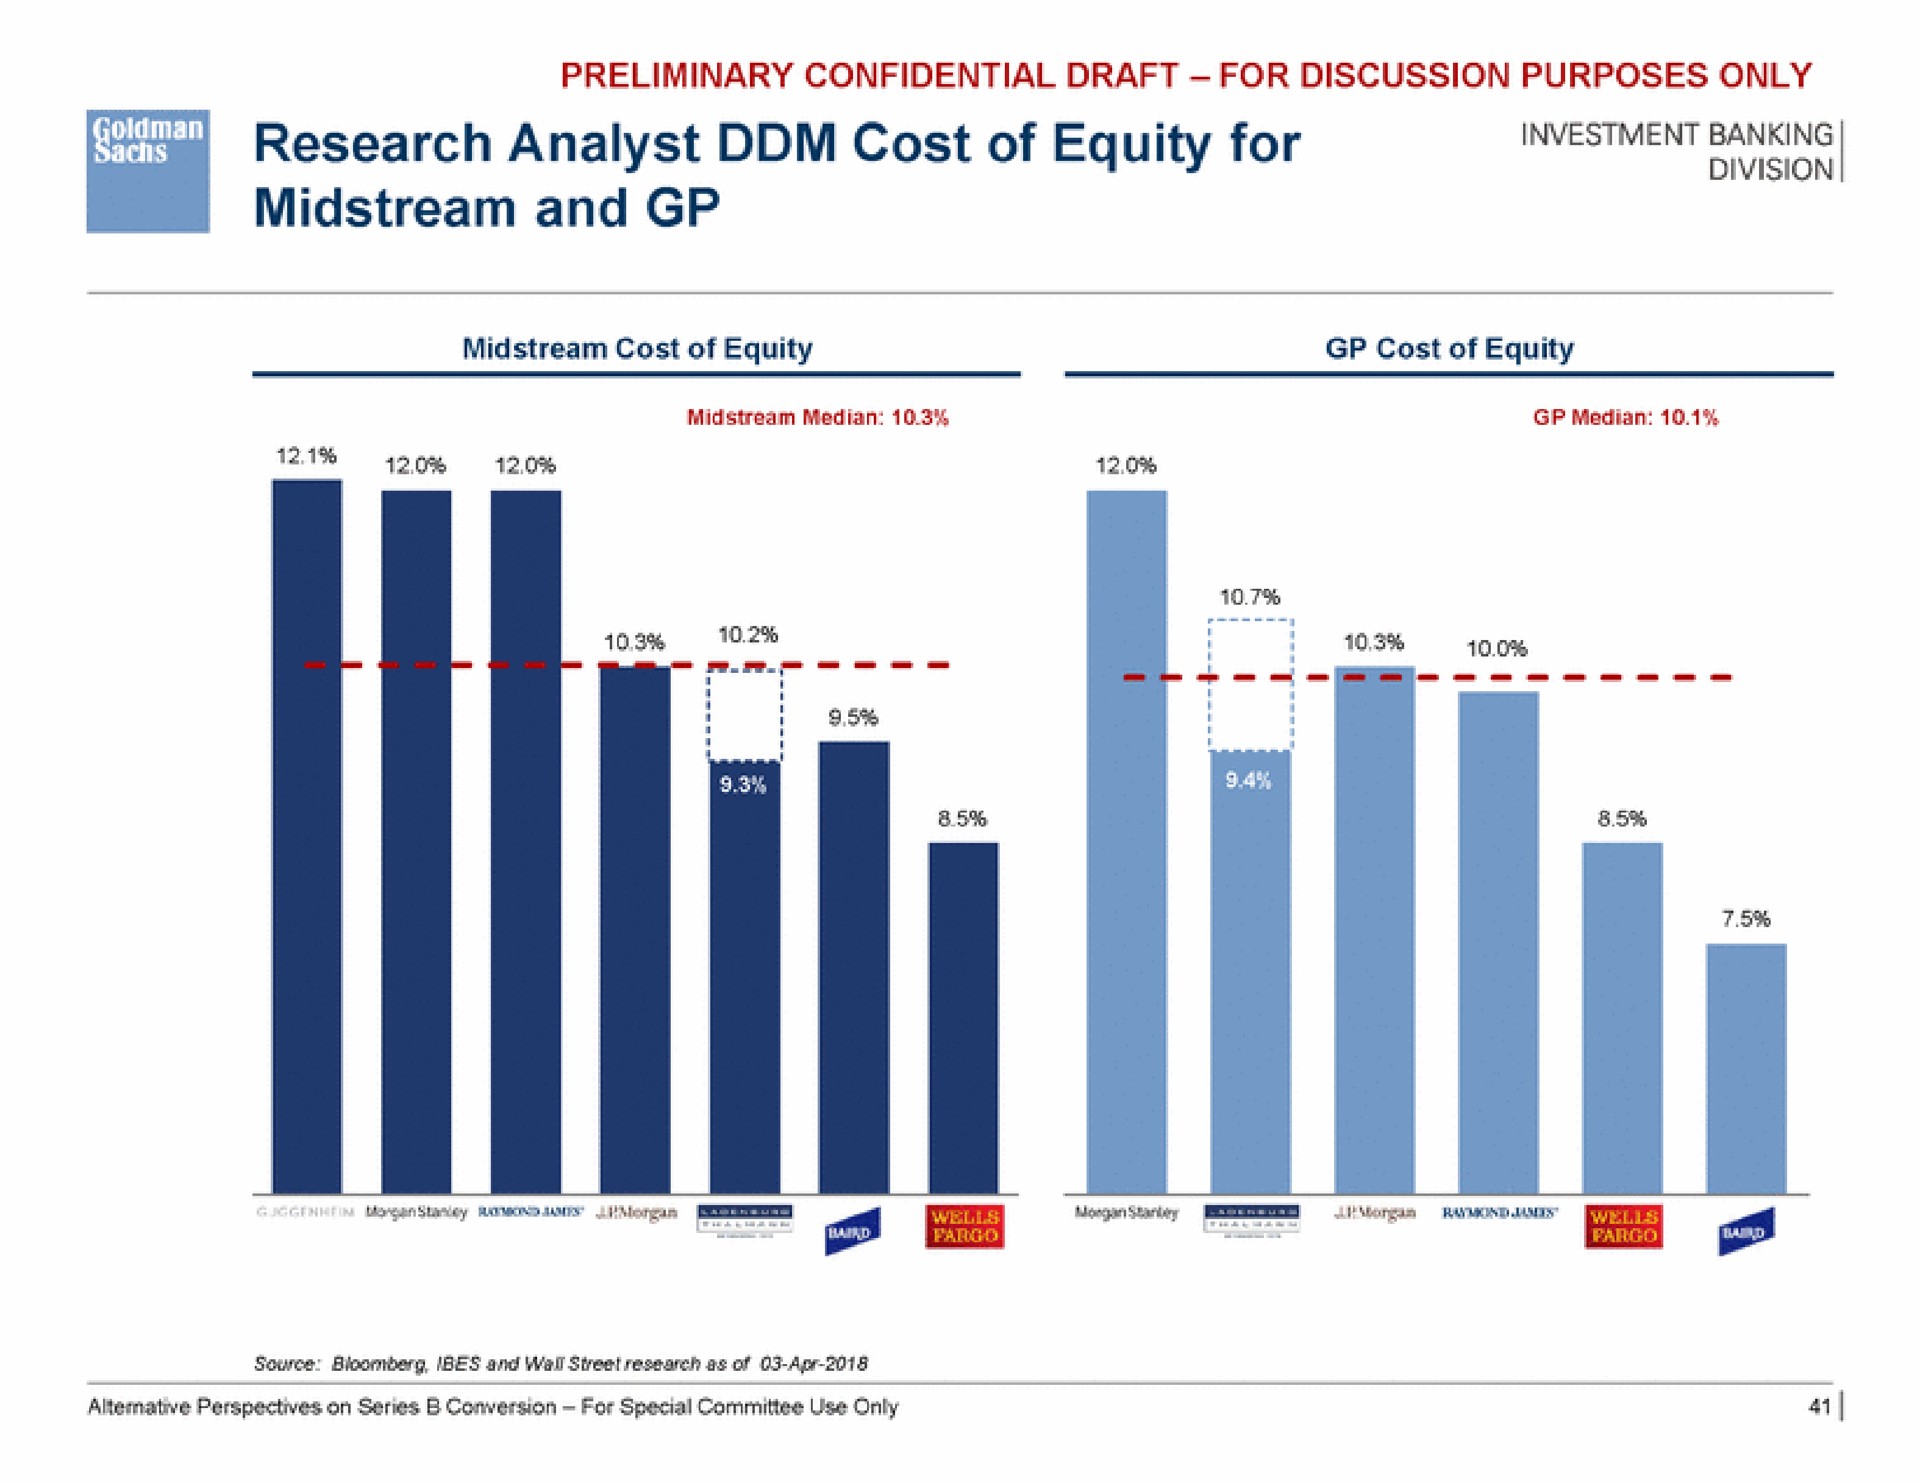 be research analyst cost of equity for midstream and | Goldman Sachs